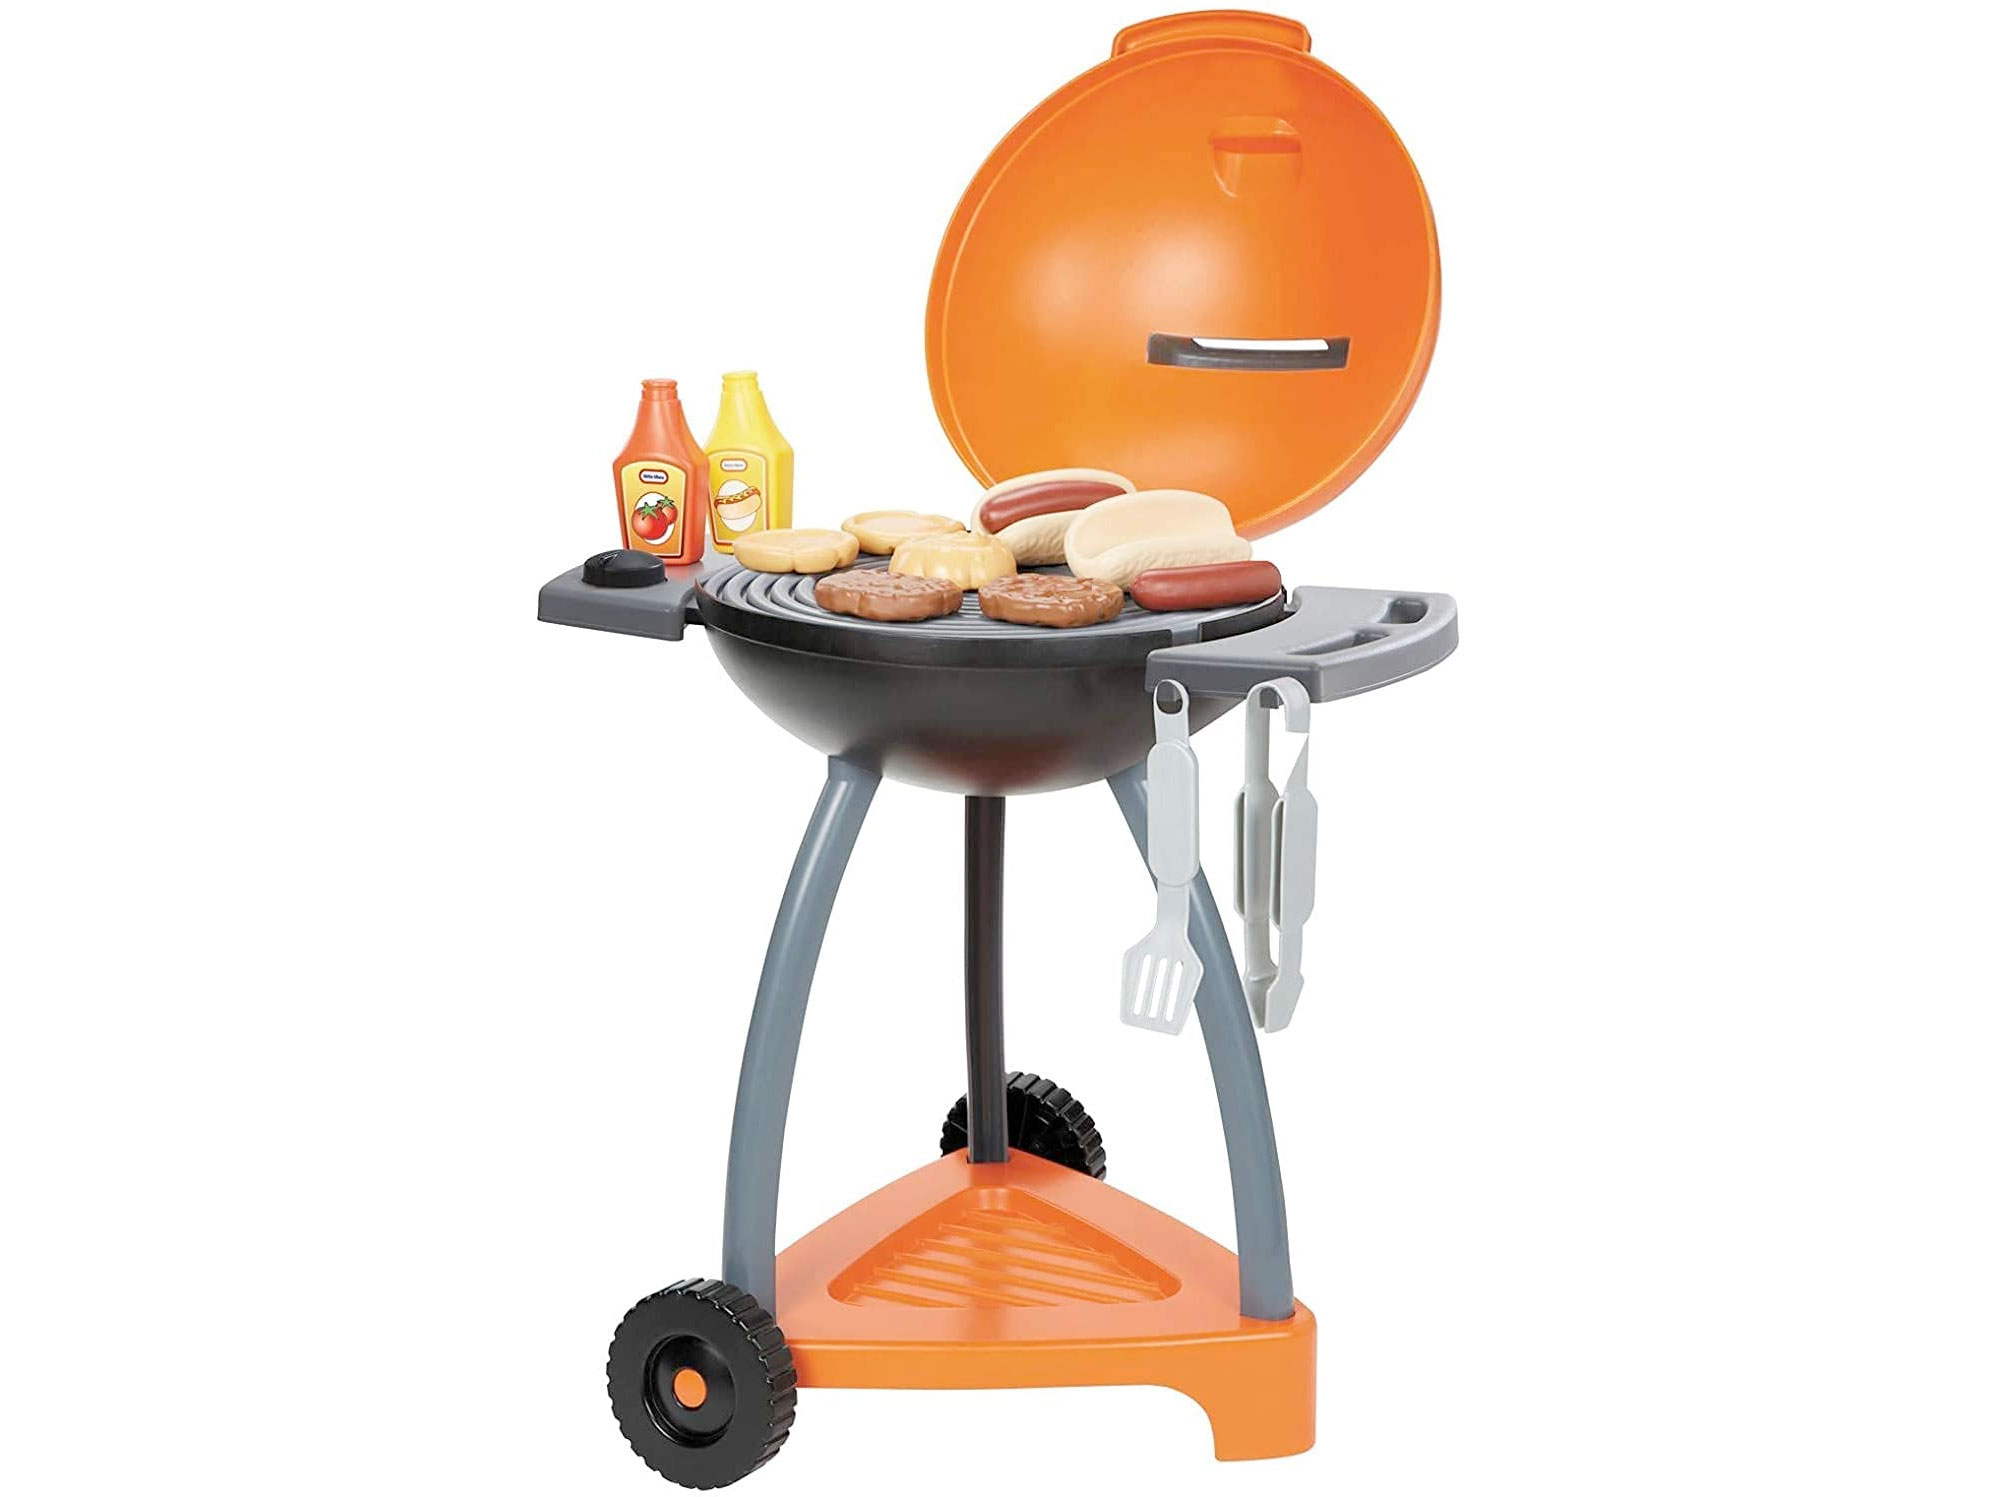 Amazon：Little Tikes Sizzle And Serve Grill Kitchen Playsets只卖$17.49